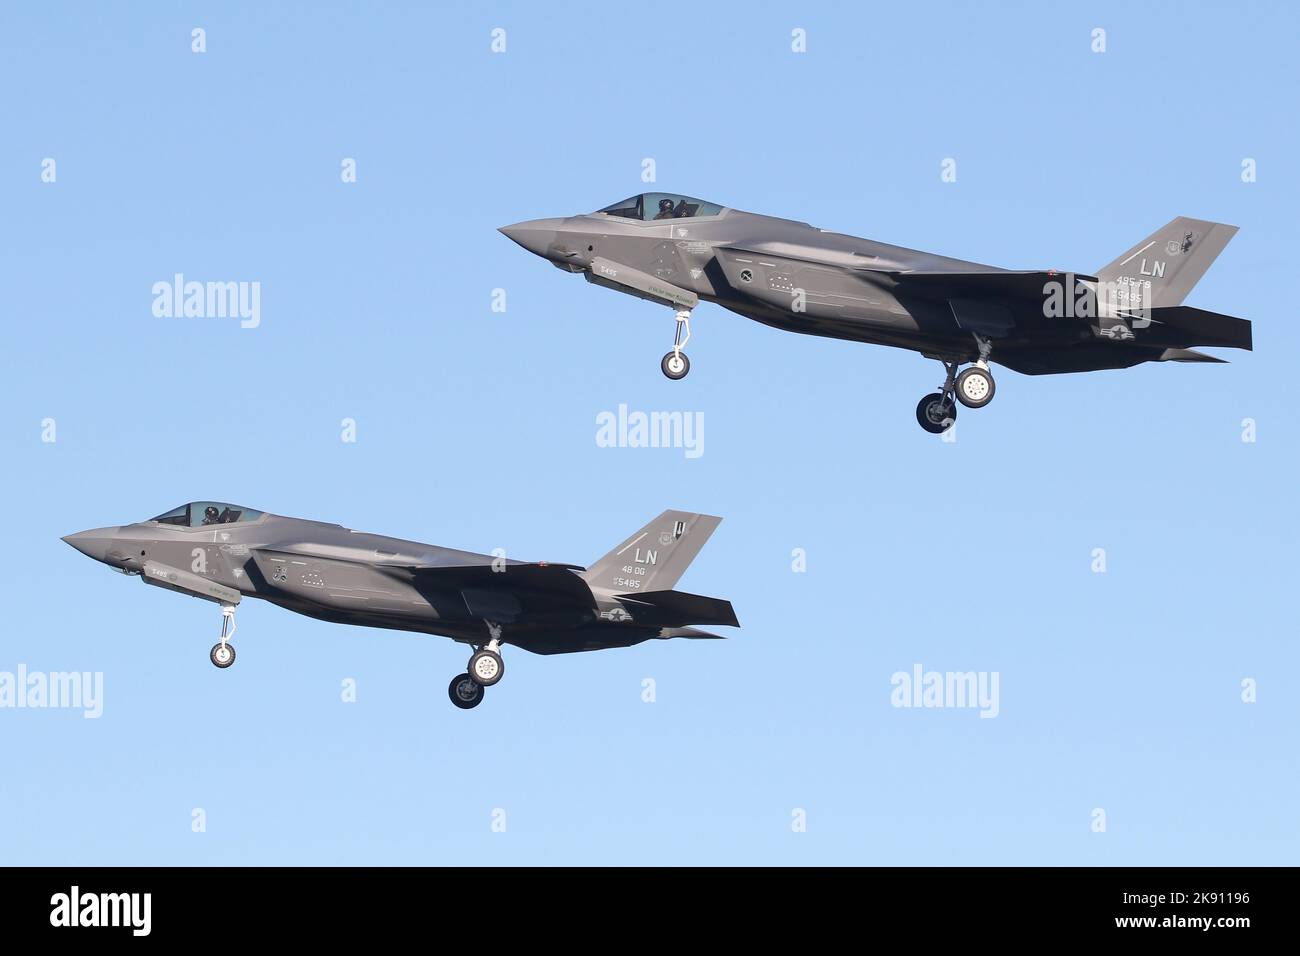 A pair of Lockheed Martin F-35A Lightning II strike fighters on the approach into RAF Lakenheath. Stock Photo